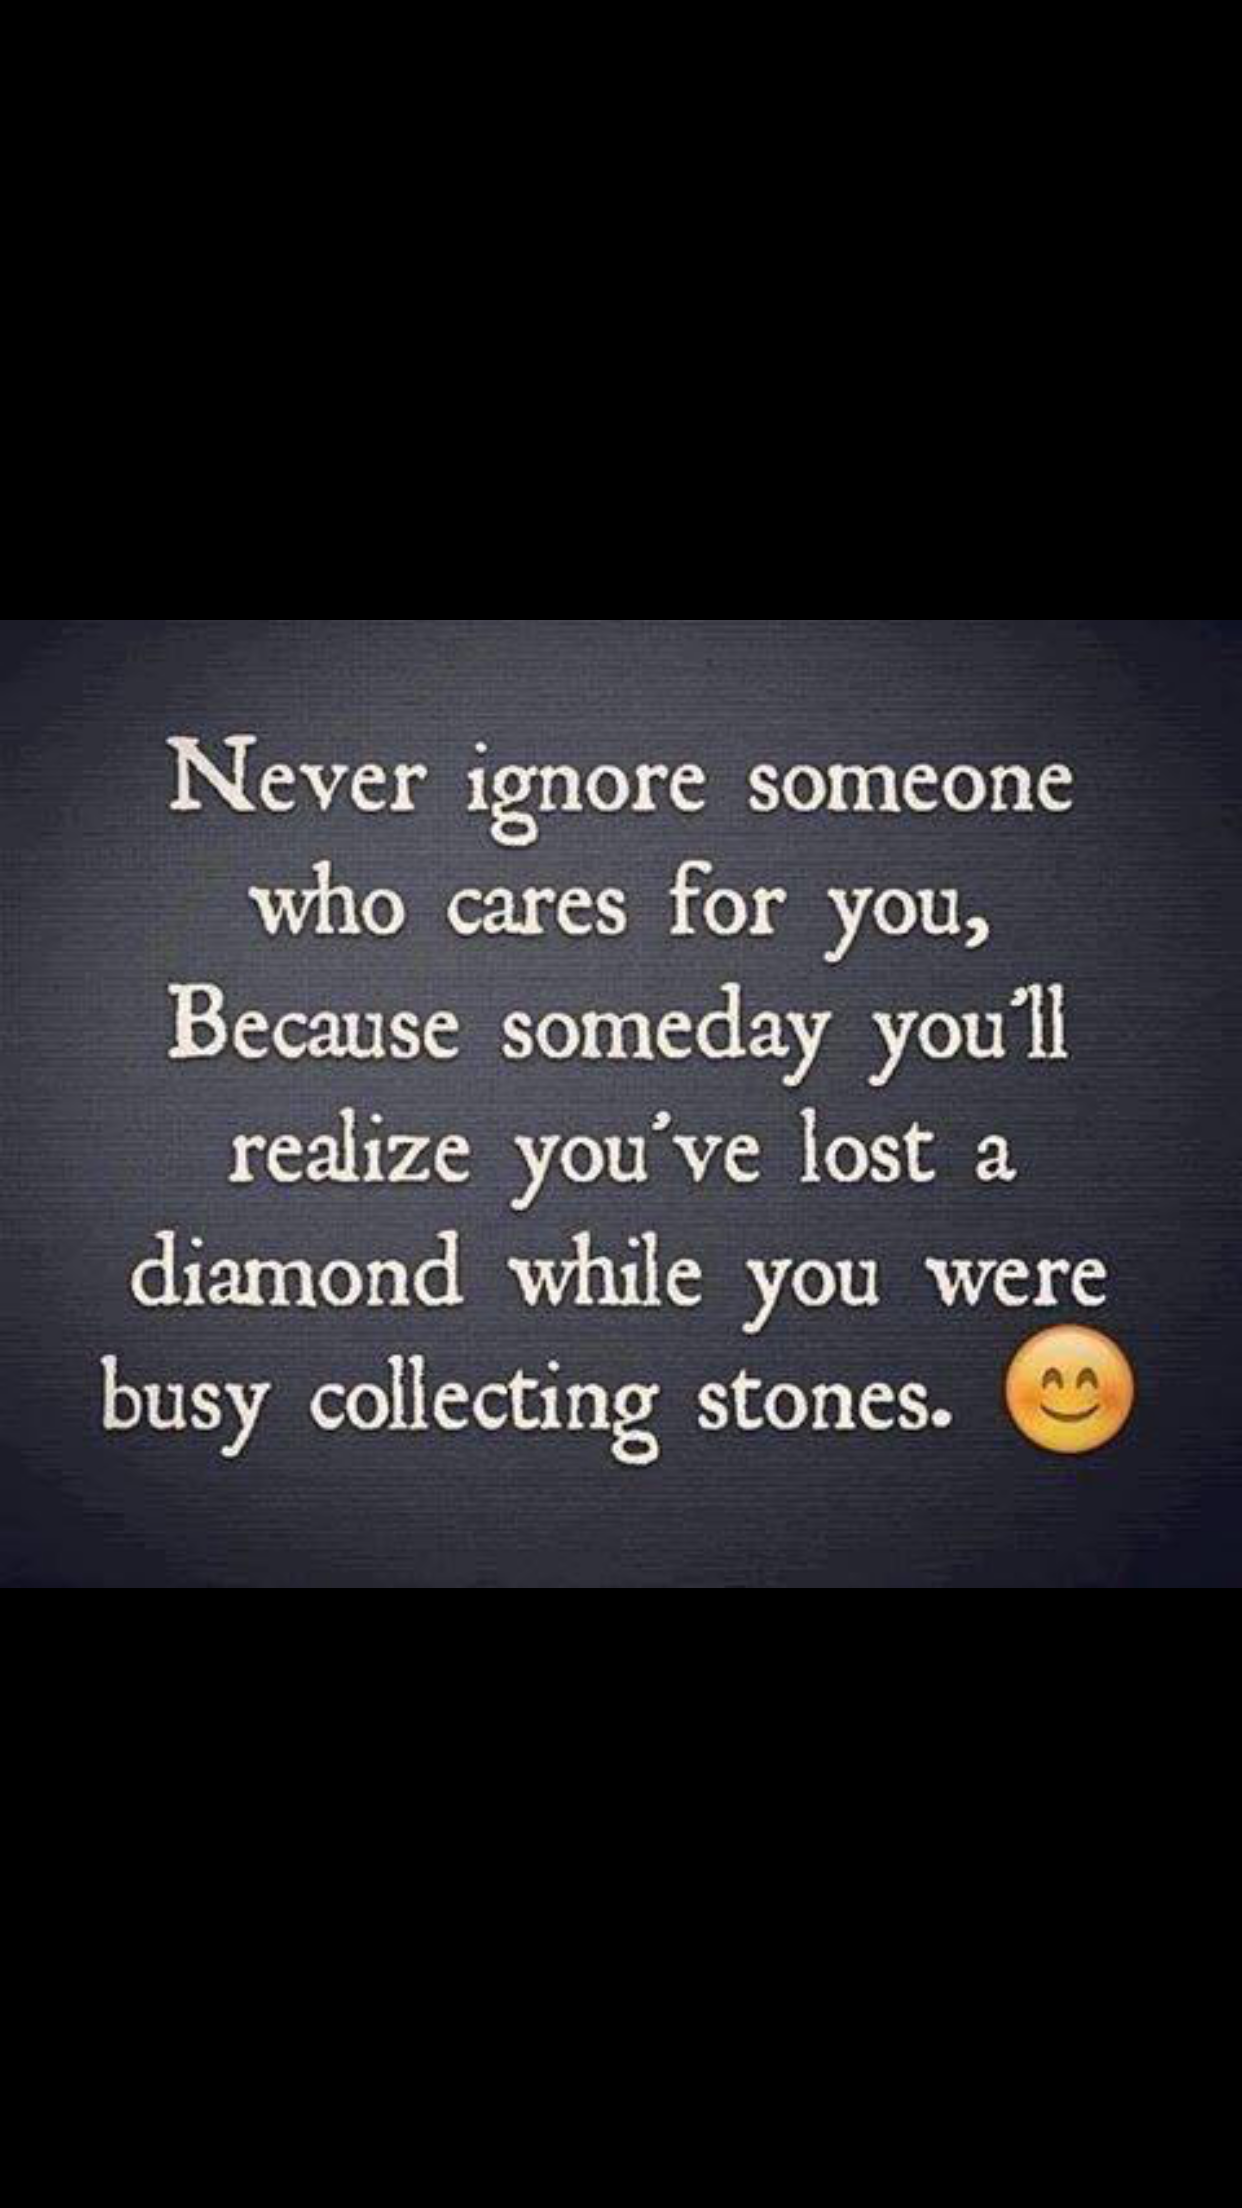 My luv stop collecting stones | Quotes | Pinterest | Stone, Life ...